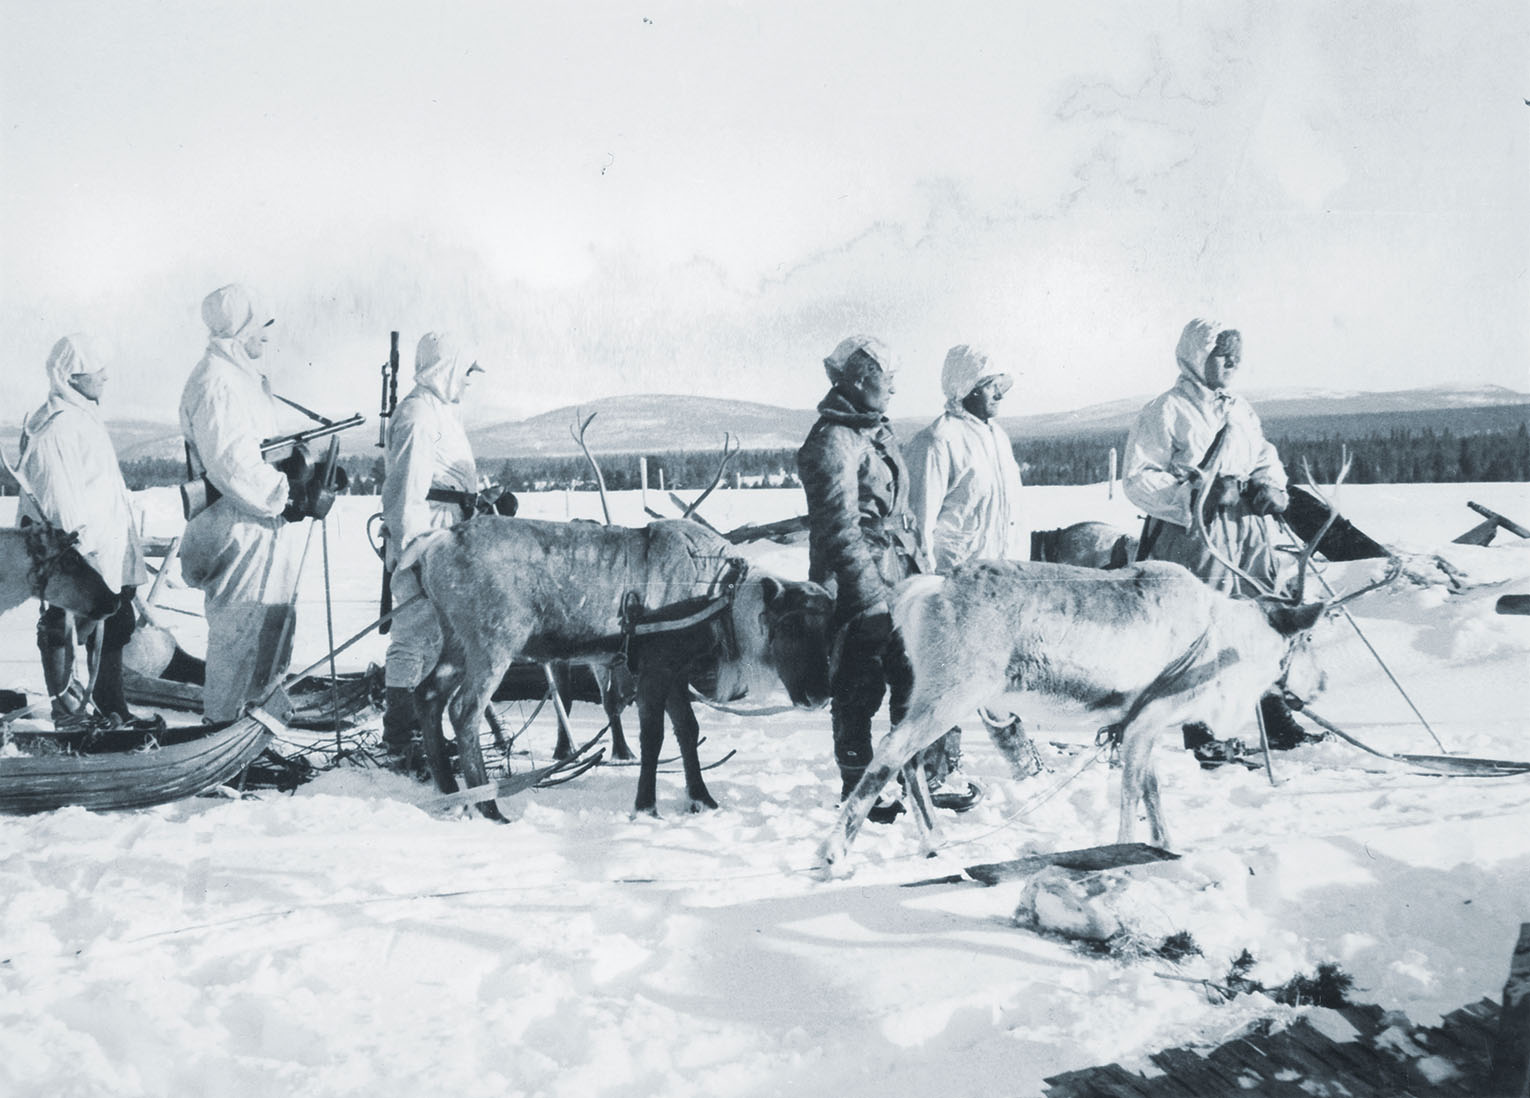 While aircraft defended Finland’s airspace, camouflaged soldiers—here using reindeer to pull supply sleds during the Winter War—engaged Russian ground forces. / Finnish Heritage Agency, CC BY-SA 4.0